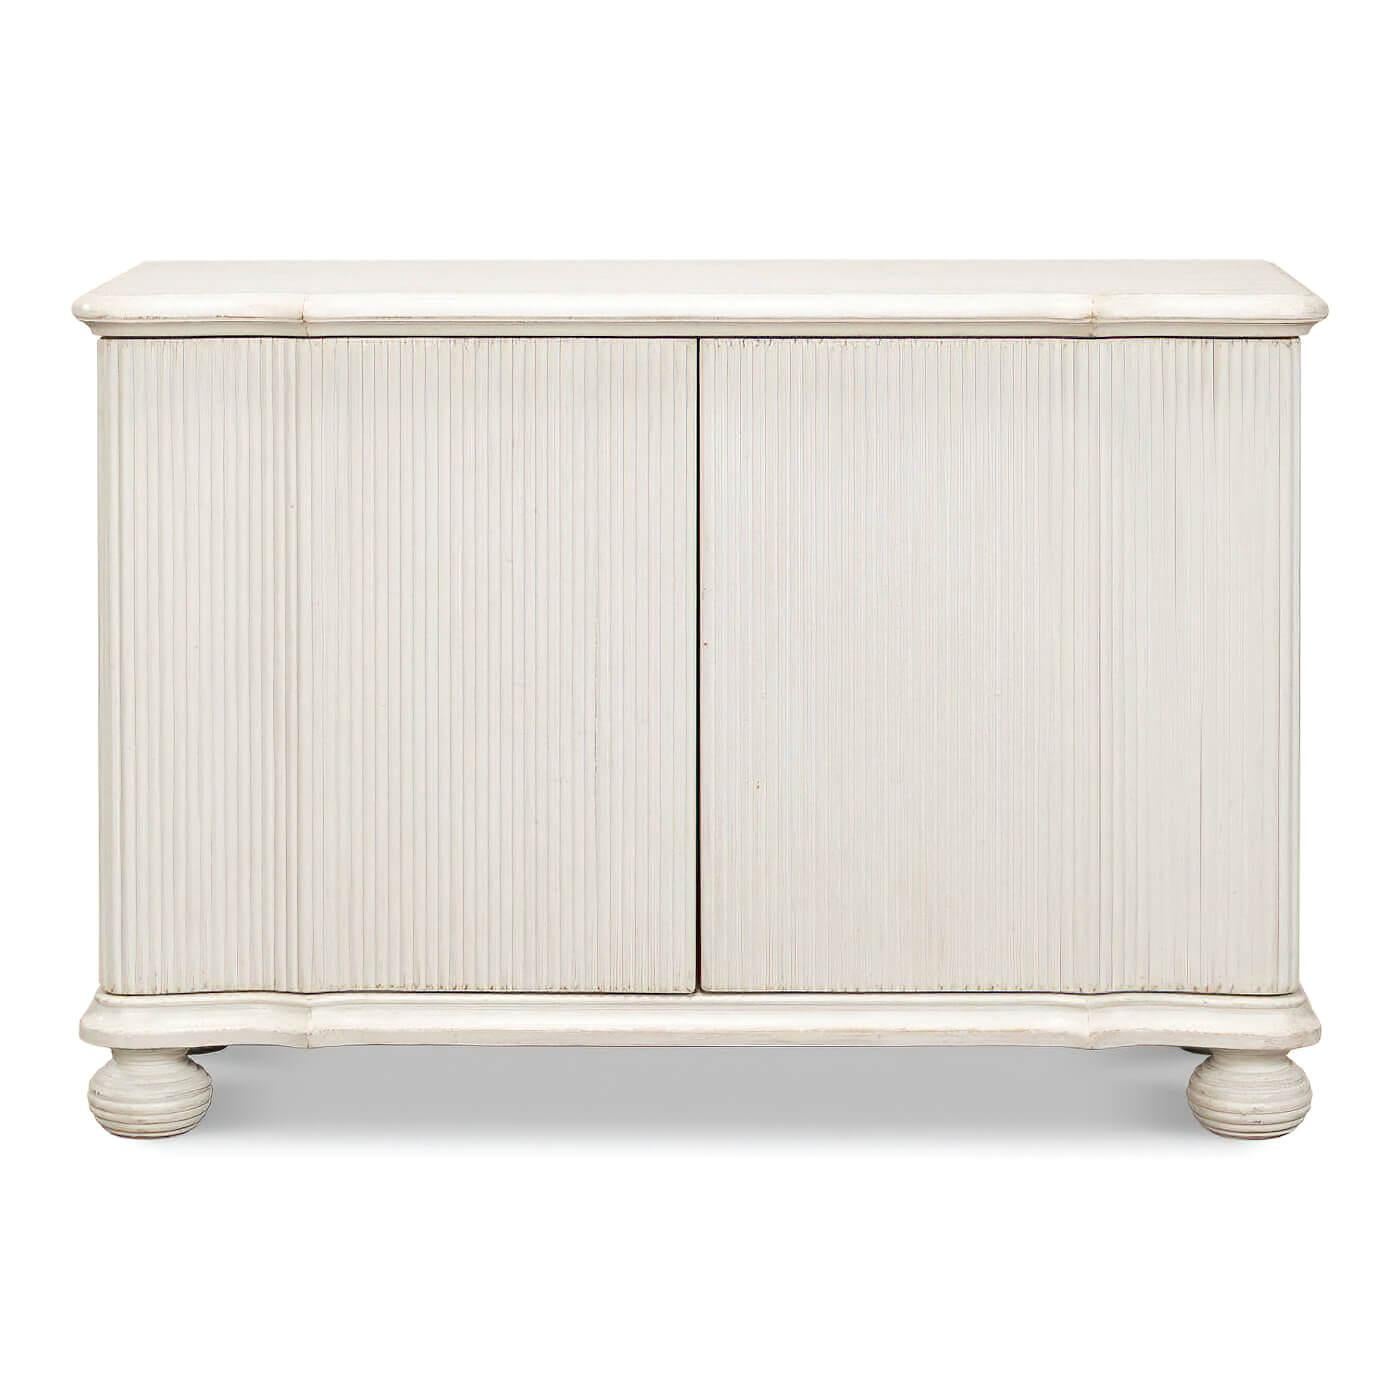 A reeded antique white cabinet crafted from reclaimed pine. It features a decorative ribbing running top to bottom on the front and sides and molded edging along the top. 

Dimensions: 53